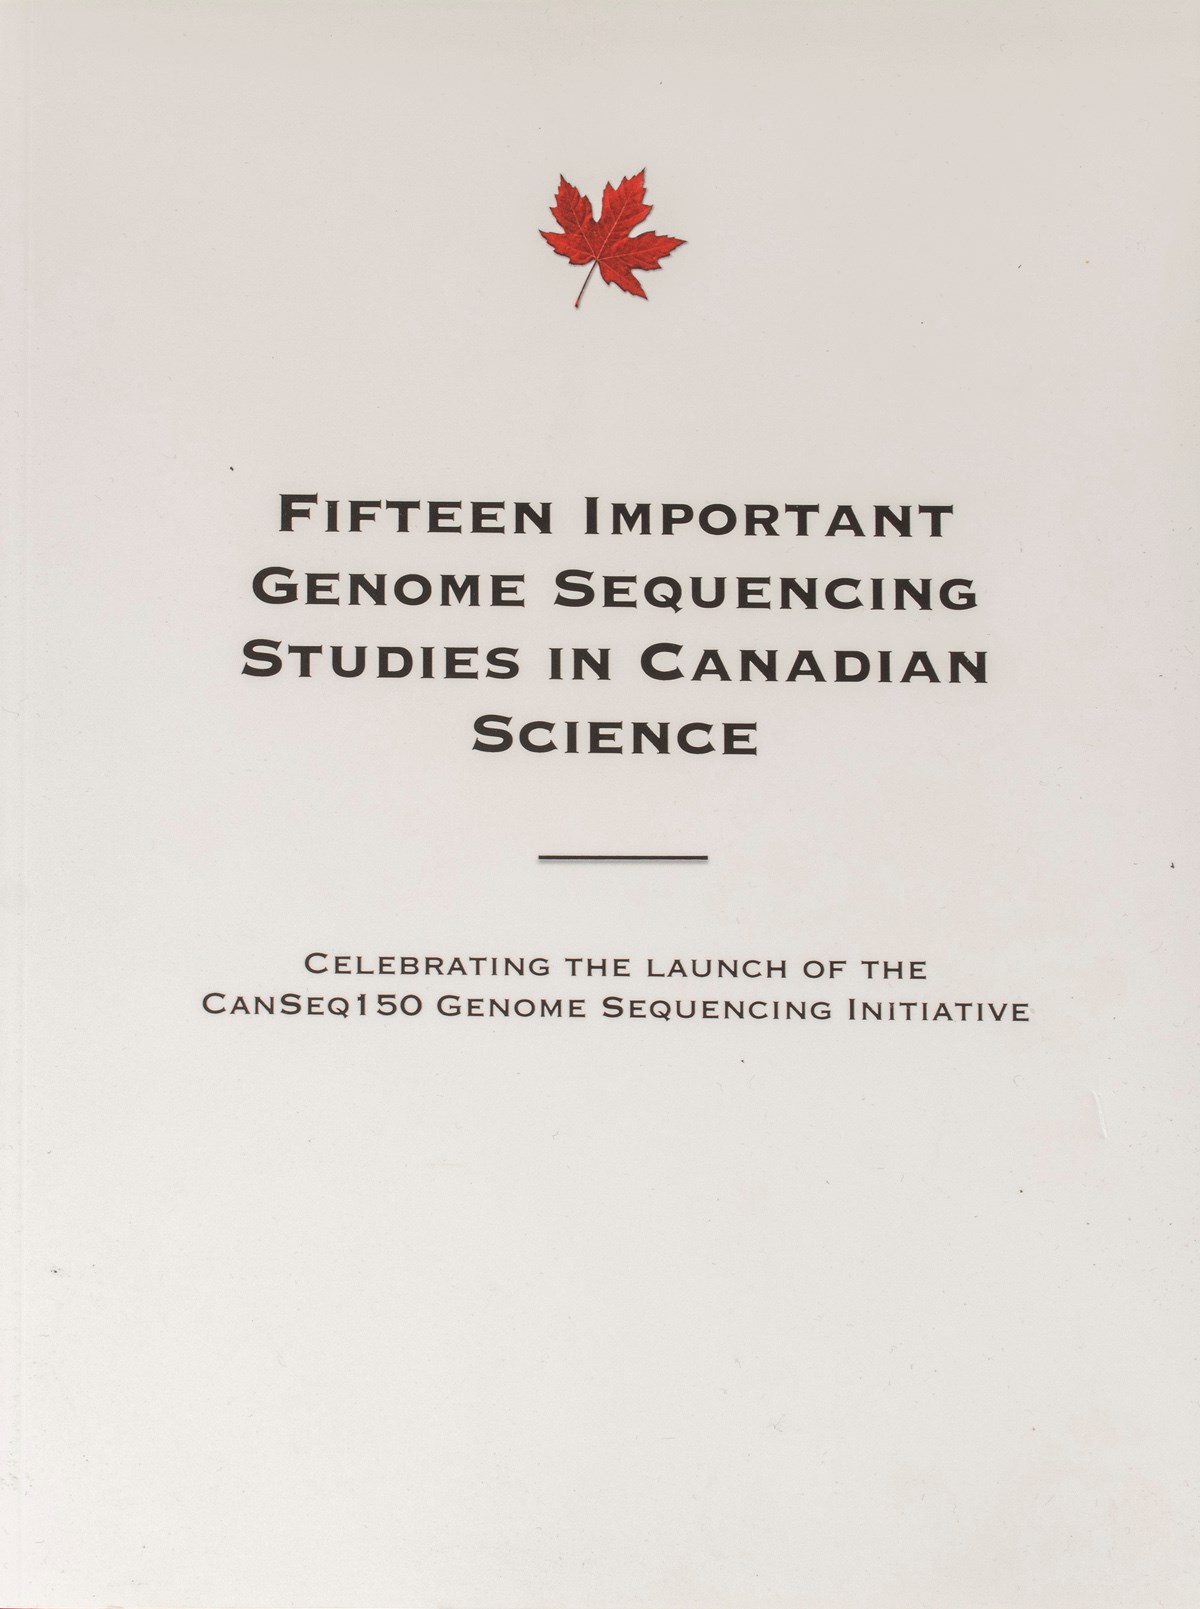 The cover page of "Fifteen Important Genome Sequencing Studies in Canadian Science". The subtext reads, "Celebrating the launch of the CanSeq150 Genome Sequencing Initiative". Above the title is a red maple leaf. 